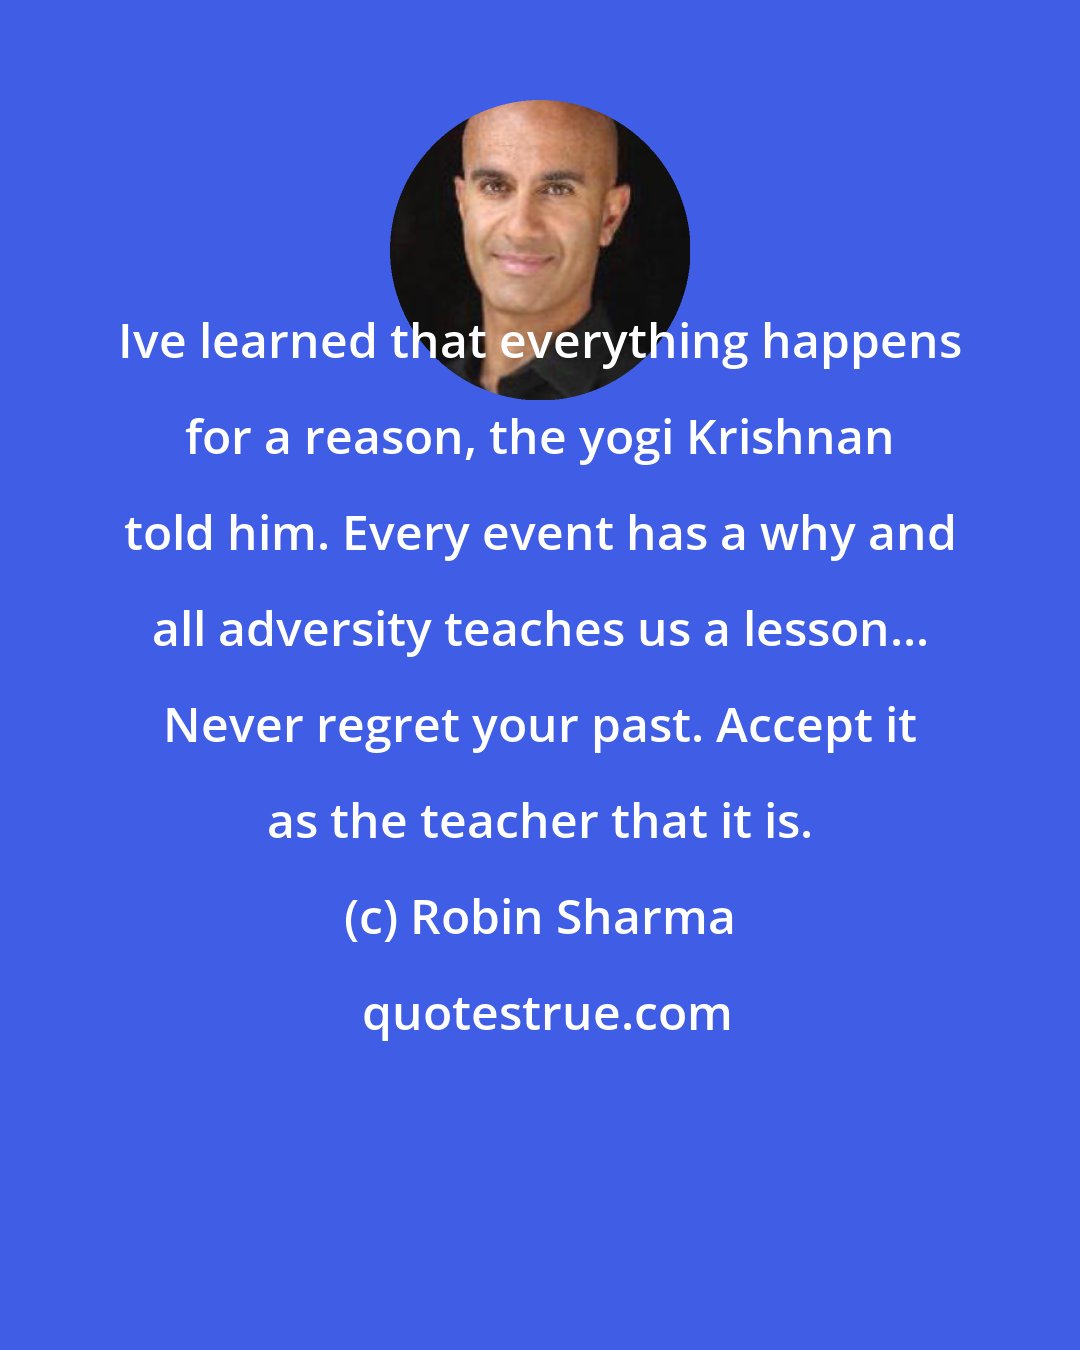 Robin Sharma: Ive learned that everything happens for a reason, the yogi Krishnan told him. Every event has a why and all adversity teaches us a lesson... Never regret your past. Accept it as the teacher that it is.